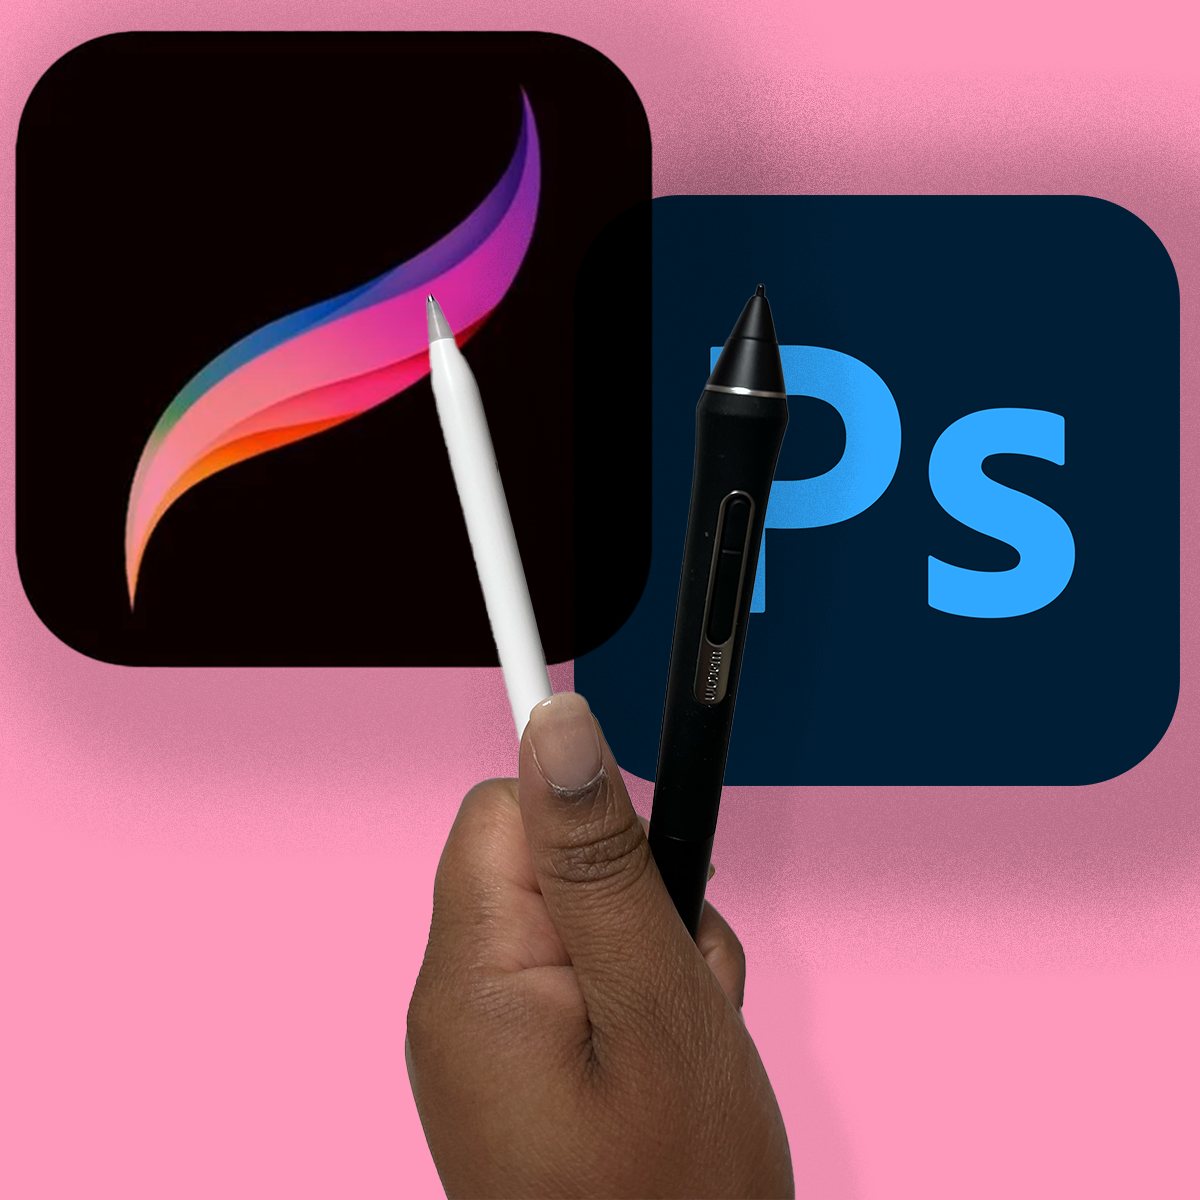 Procreate vs. Adobe Photoshop - Which is better?